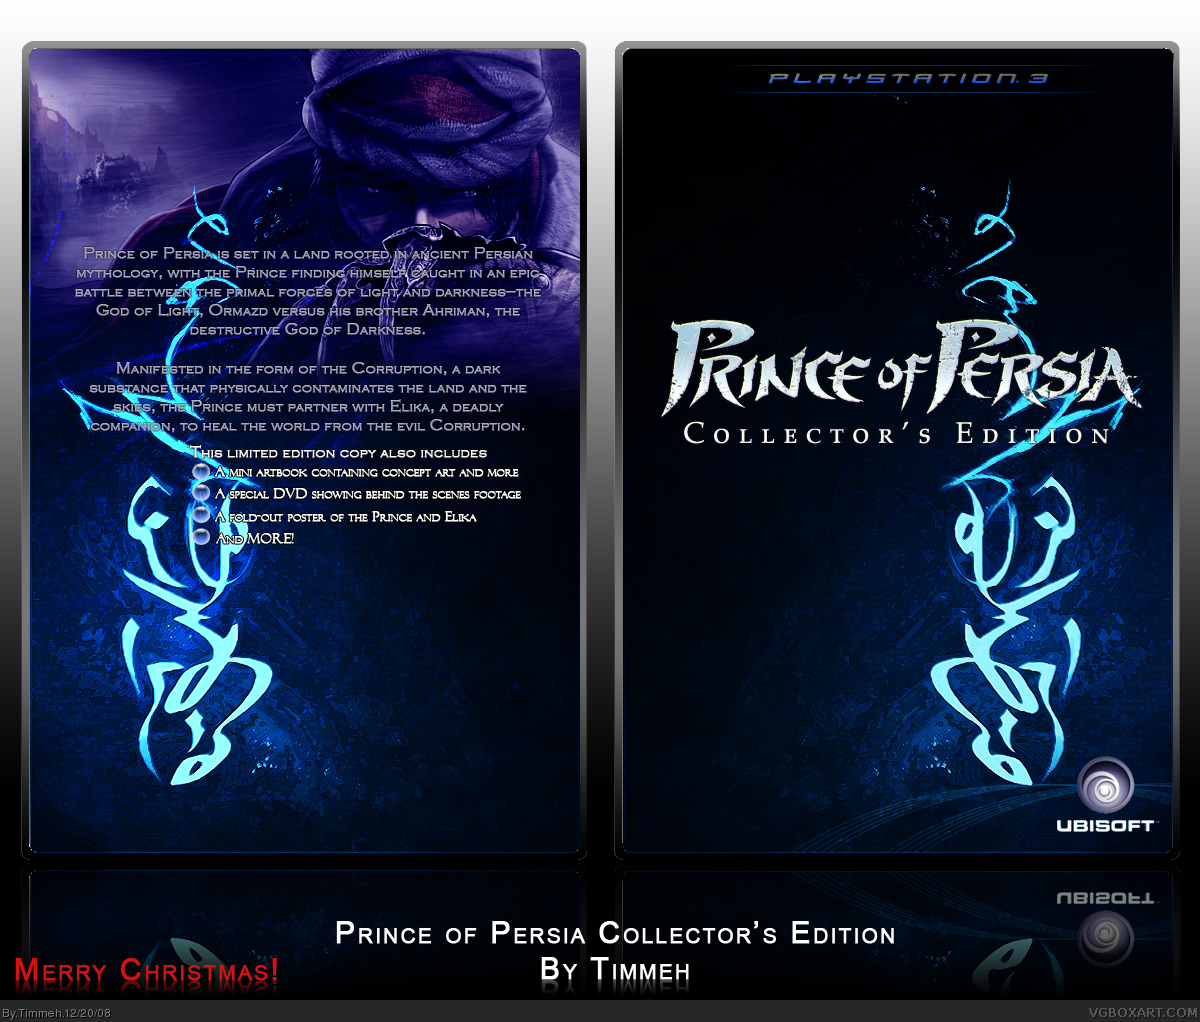 Prince of Persia Collector's Edition box cover